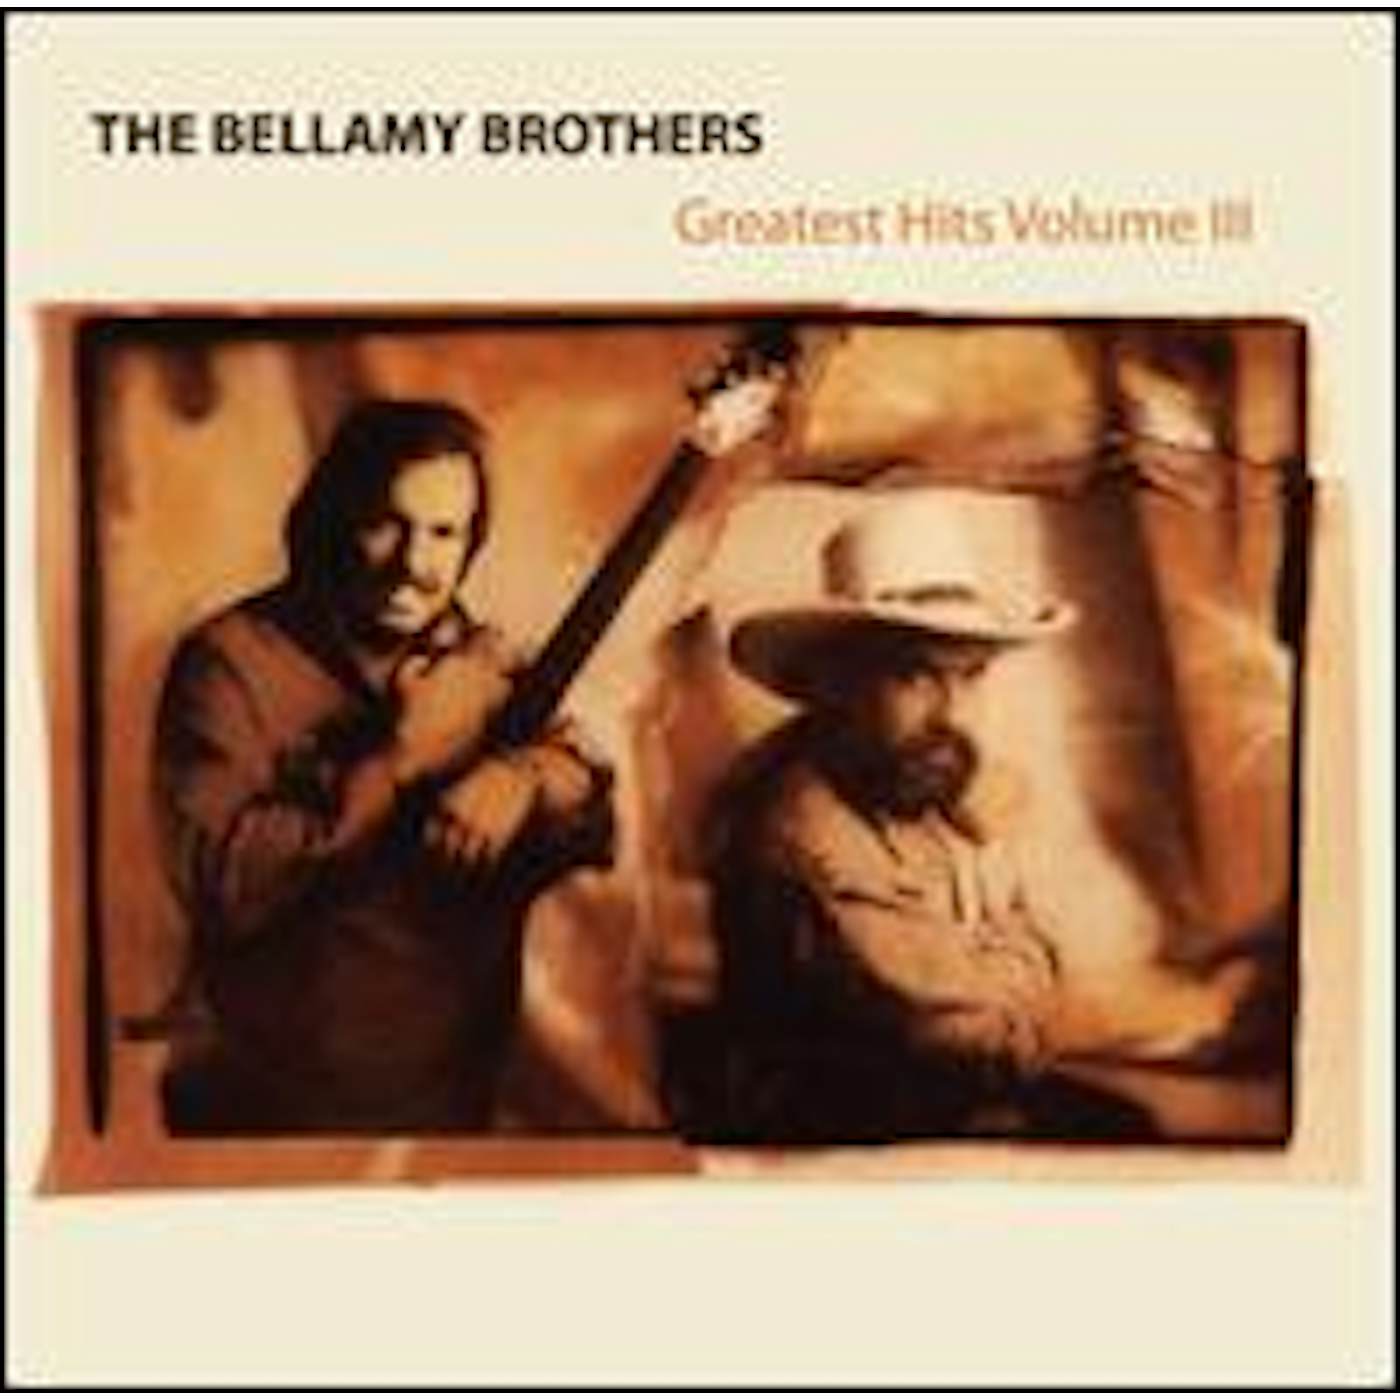 The Bellamy Brothers GREATEST HITS VOLUME III CD